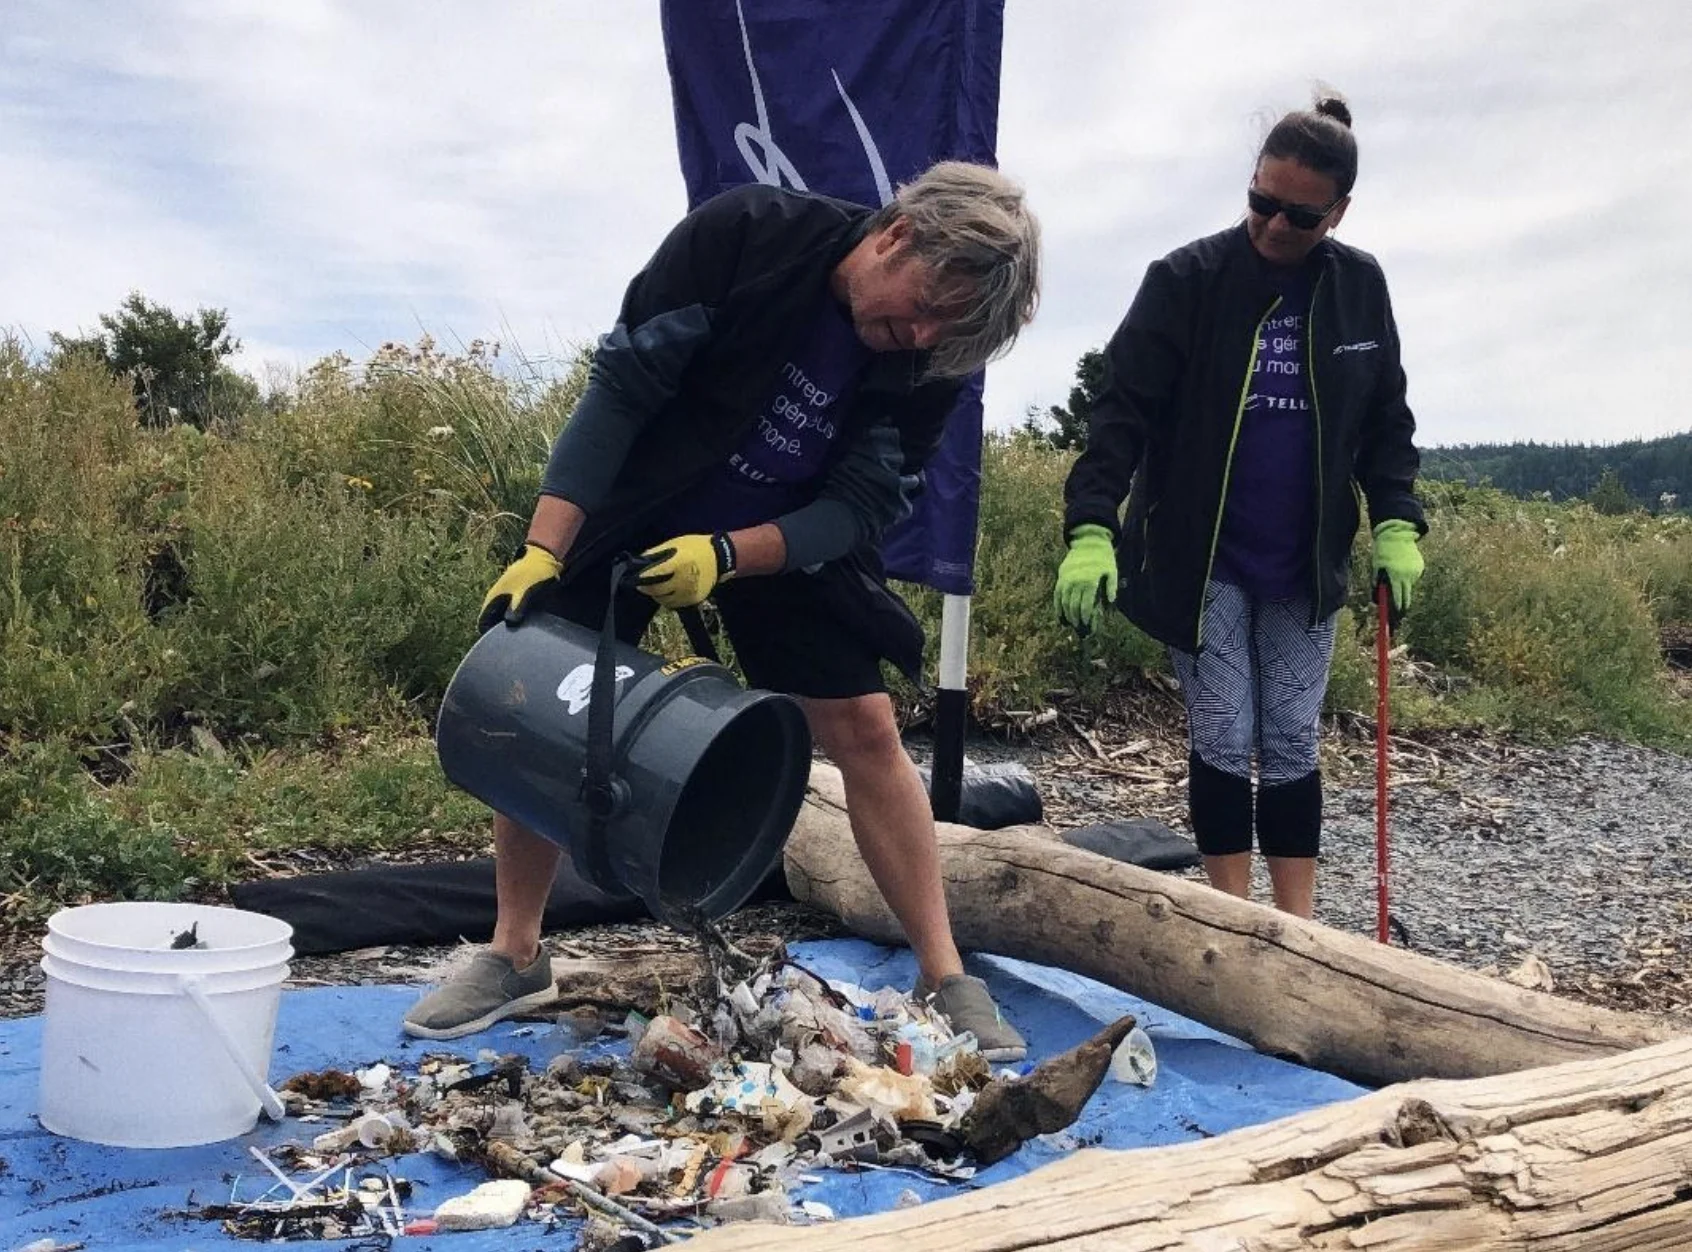 Volunteers in TELUS shirts cleaning up trash on the beach 